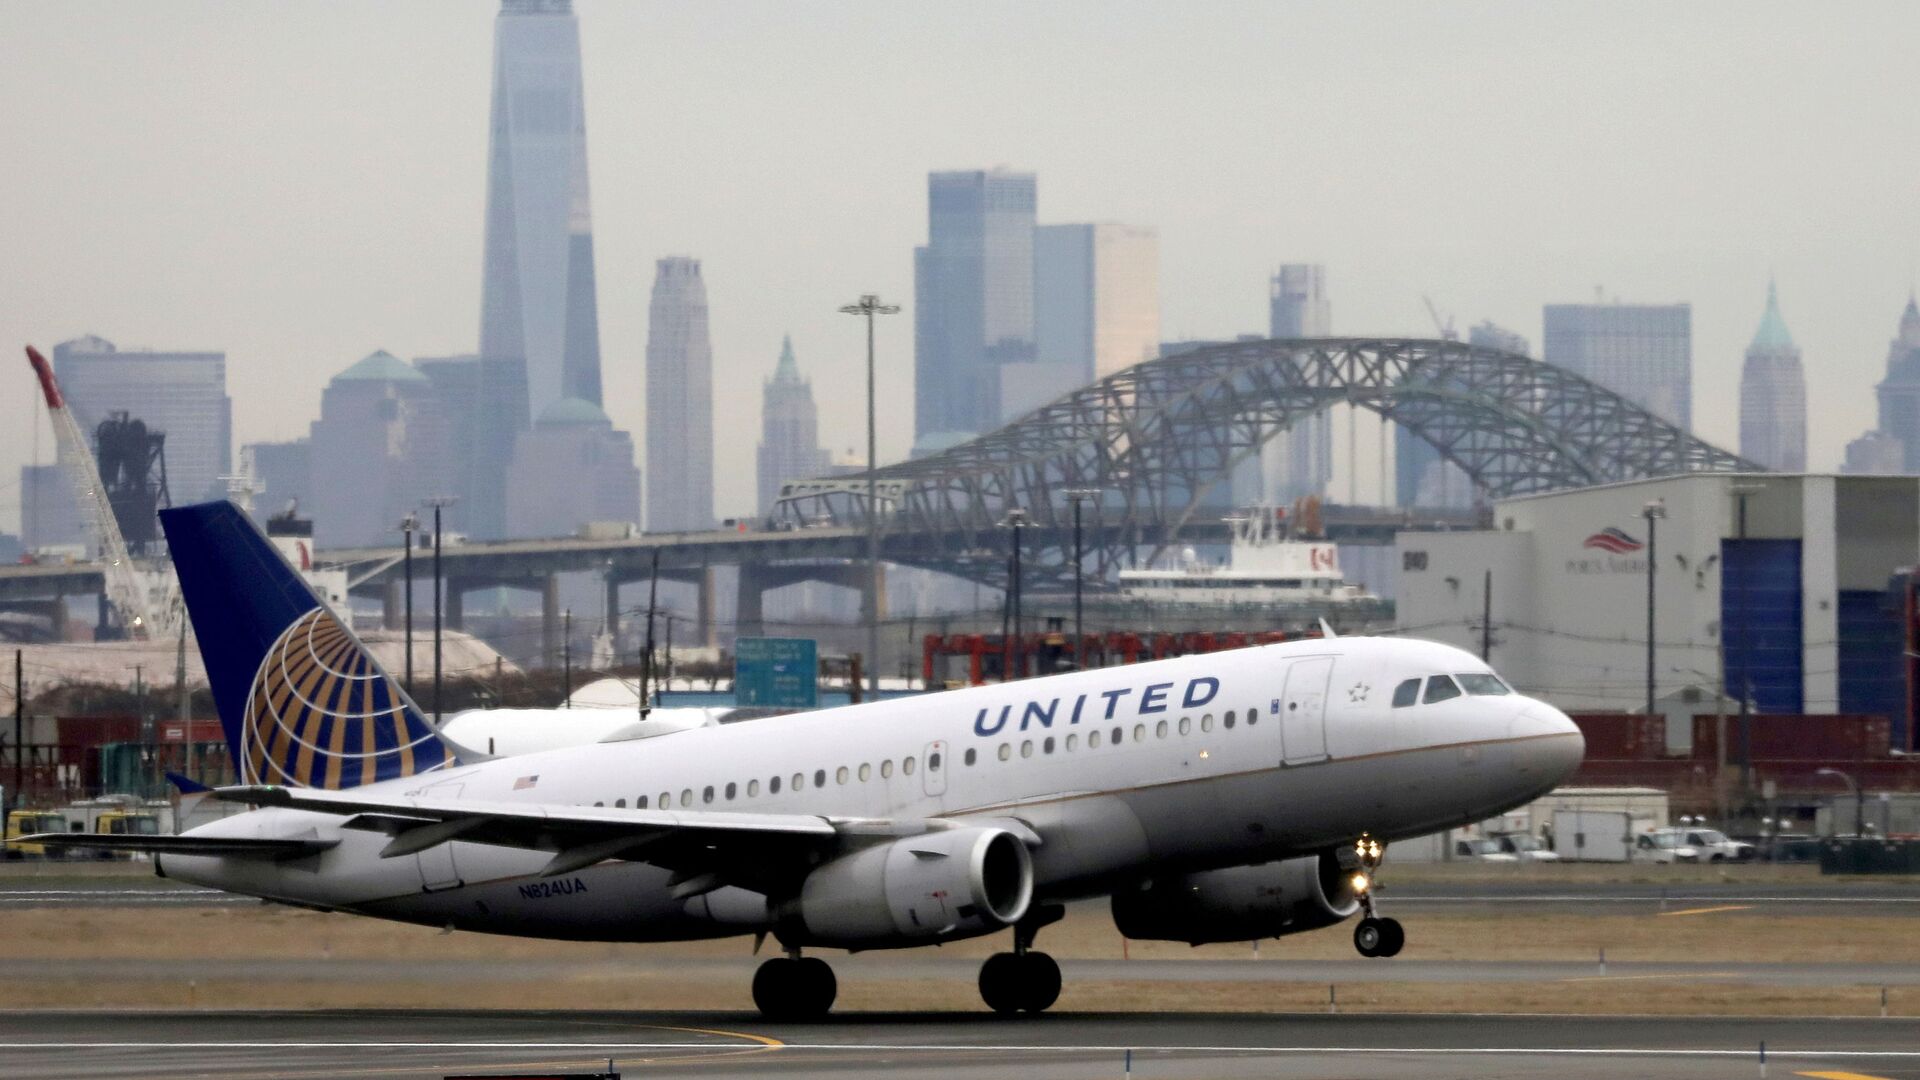 A United Airlines passenger jet takes off with New York City as a backdrop, at Newark Liberty International Airport, New Jersey, U.S. December 6, 2019. - Sputnik International, 1920, 09.09.2021